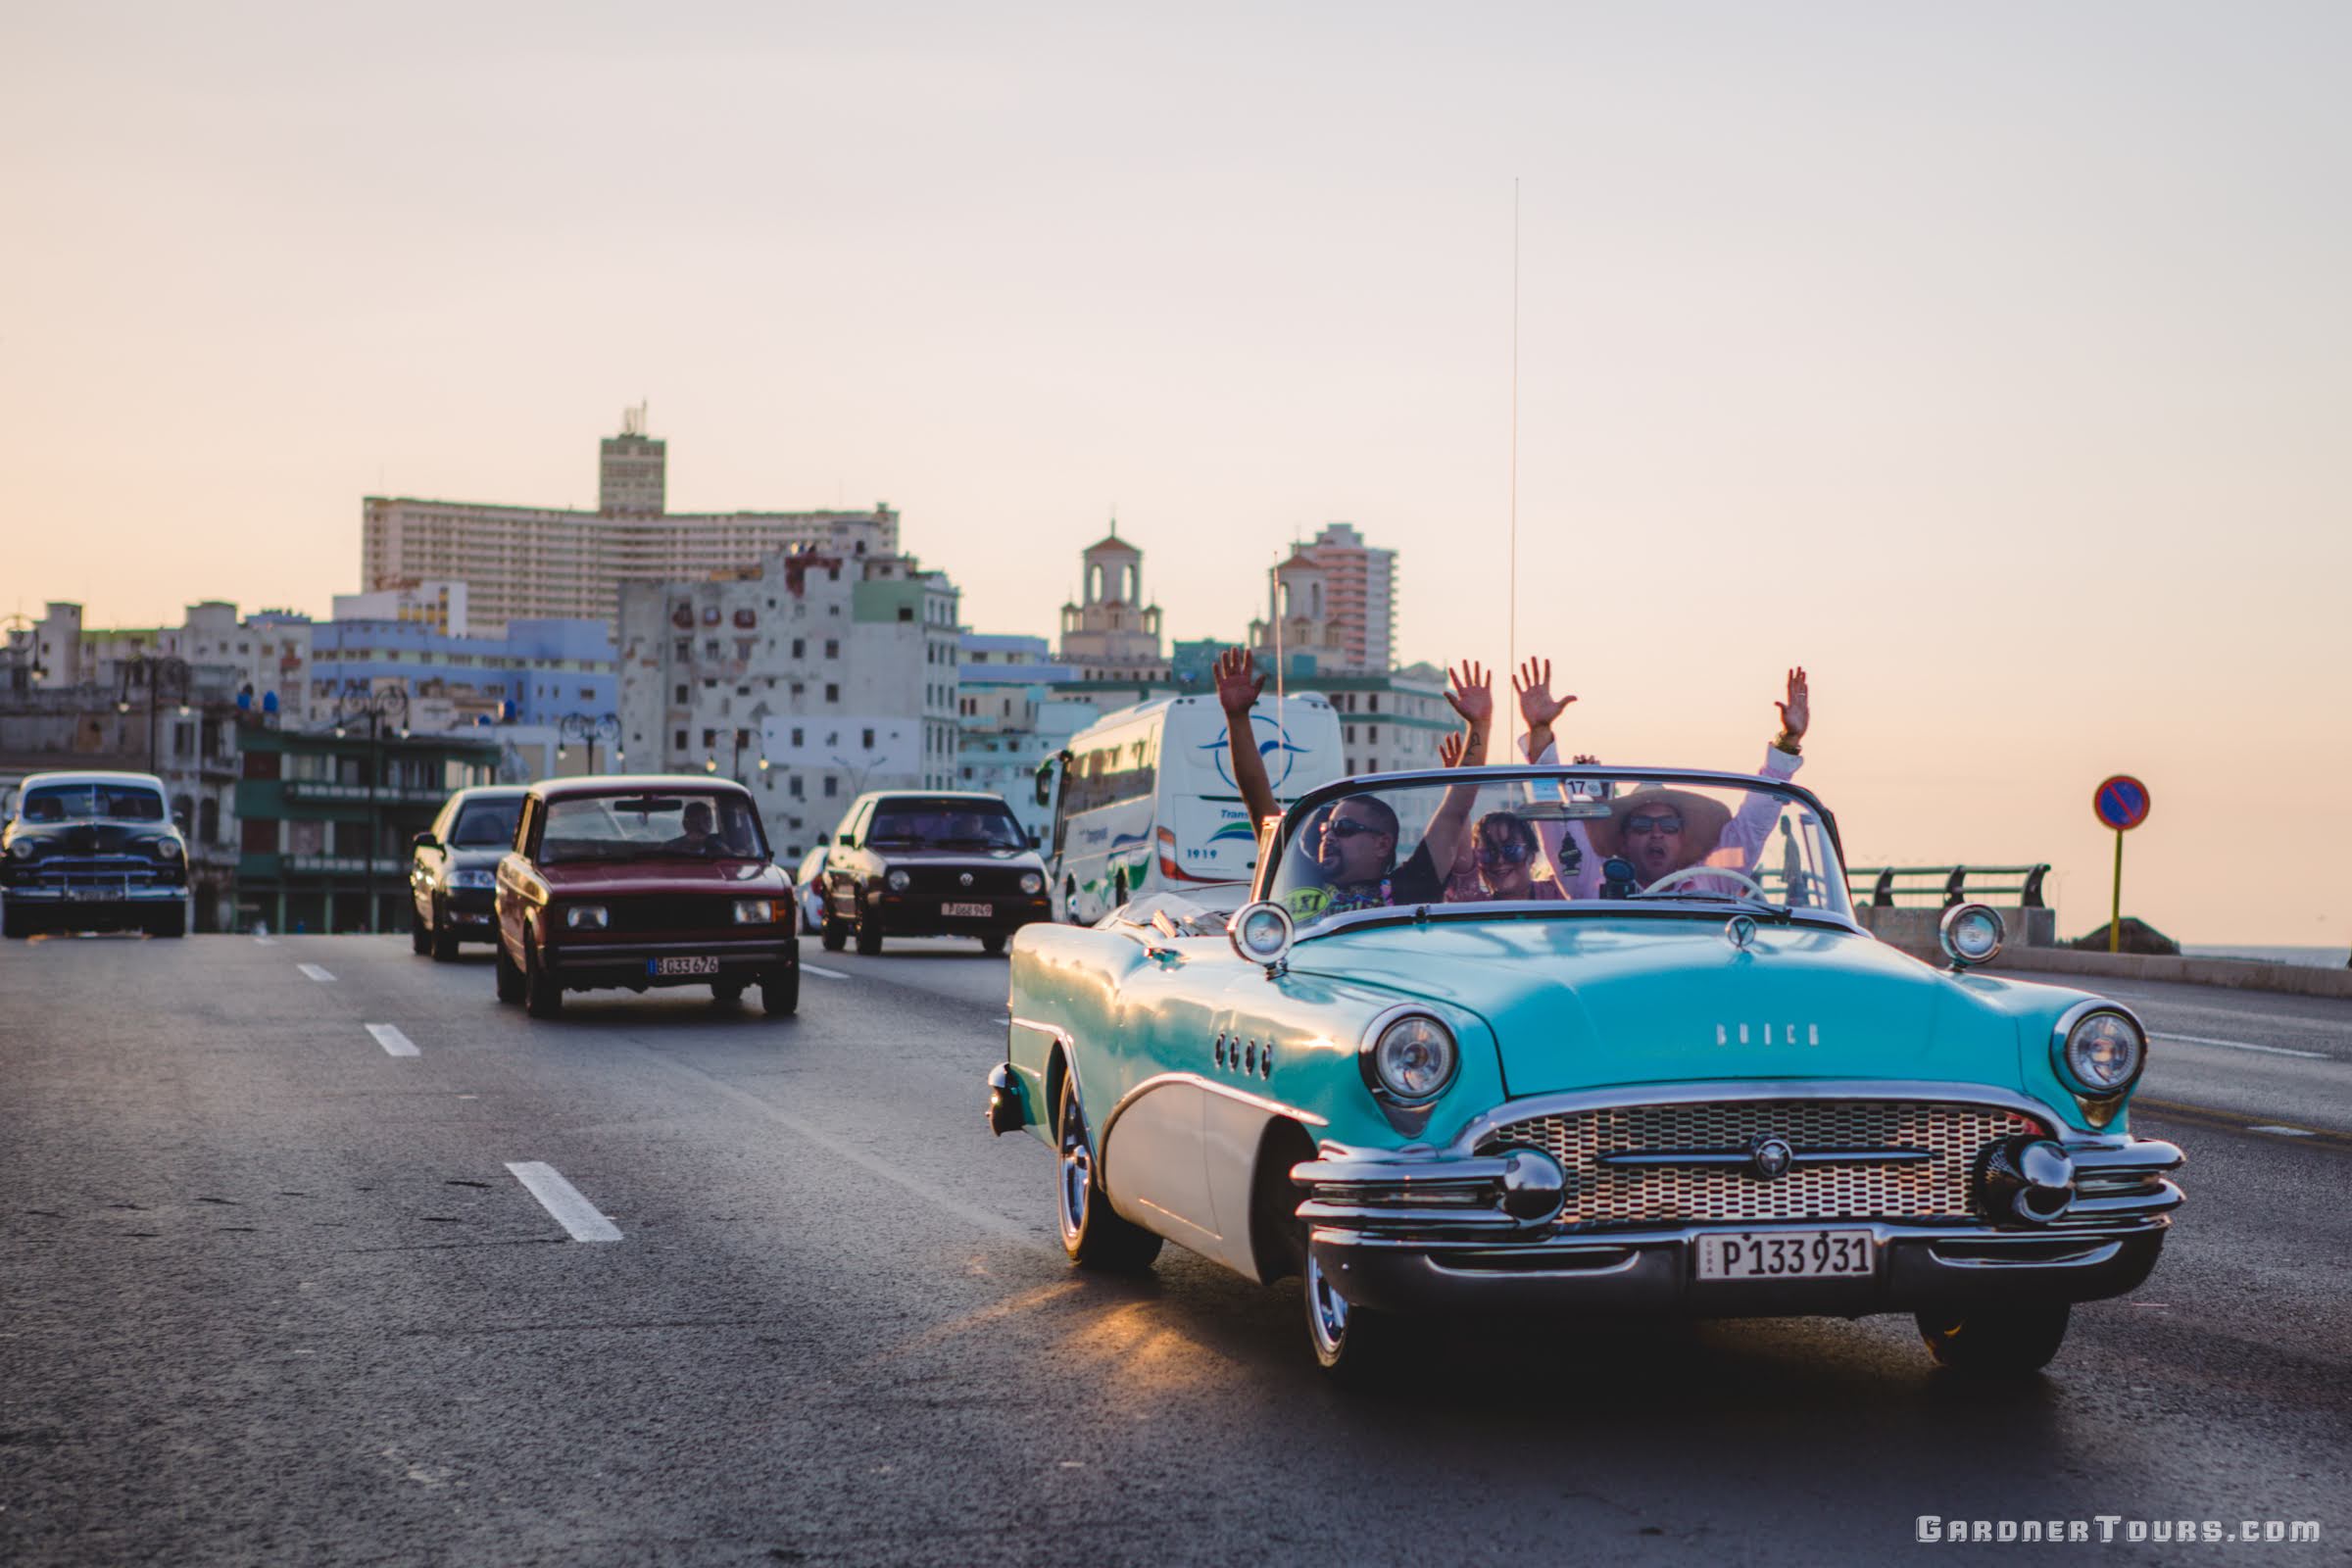 Group of People riding in Classic American Car with their Hands Up in Havana, Cuba